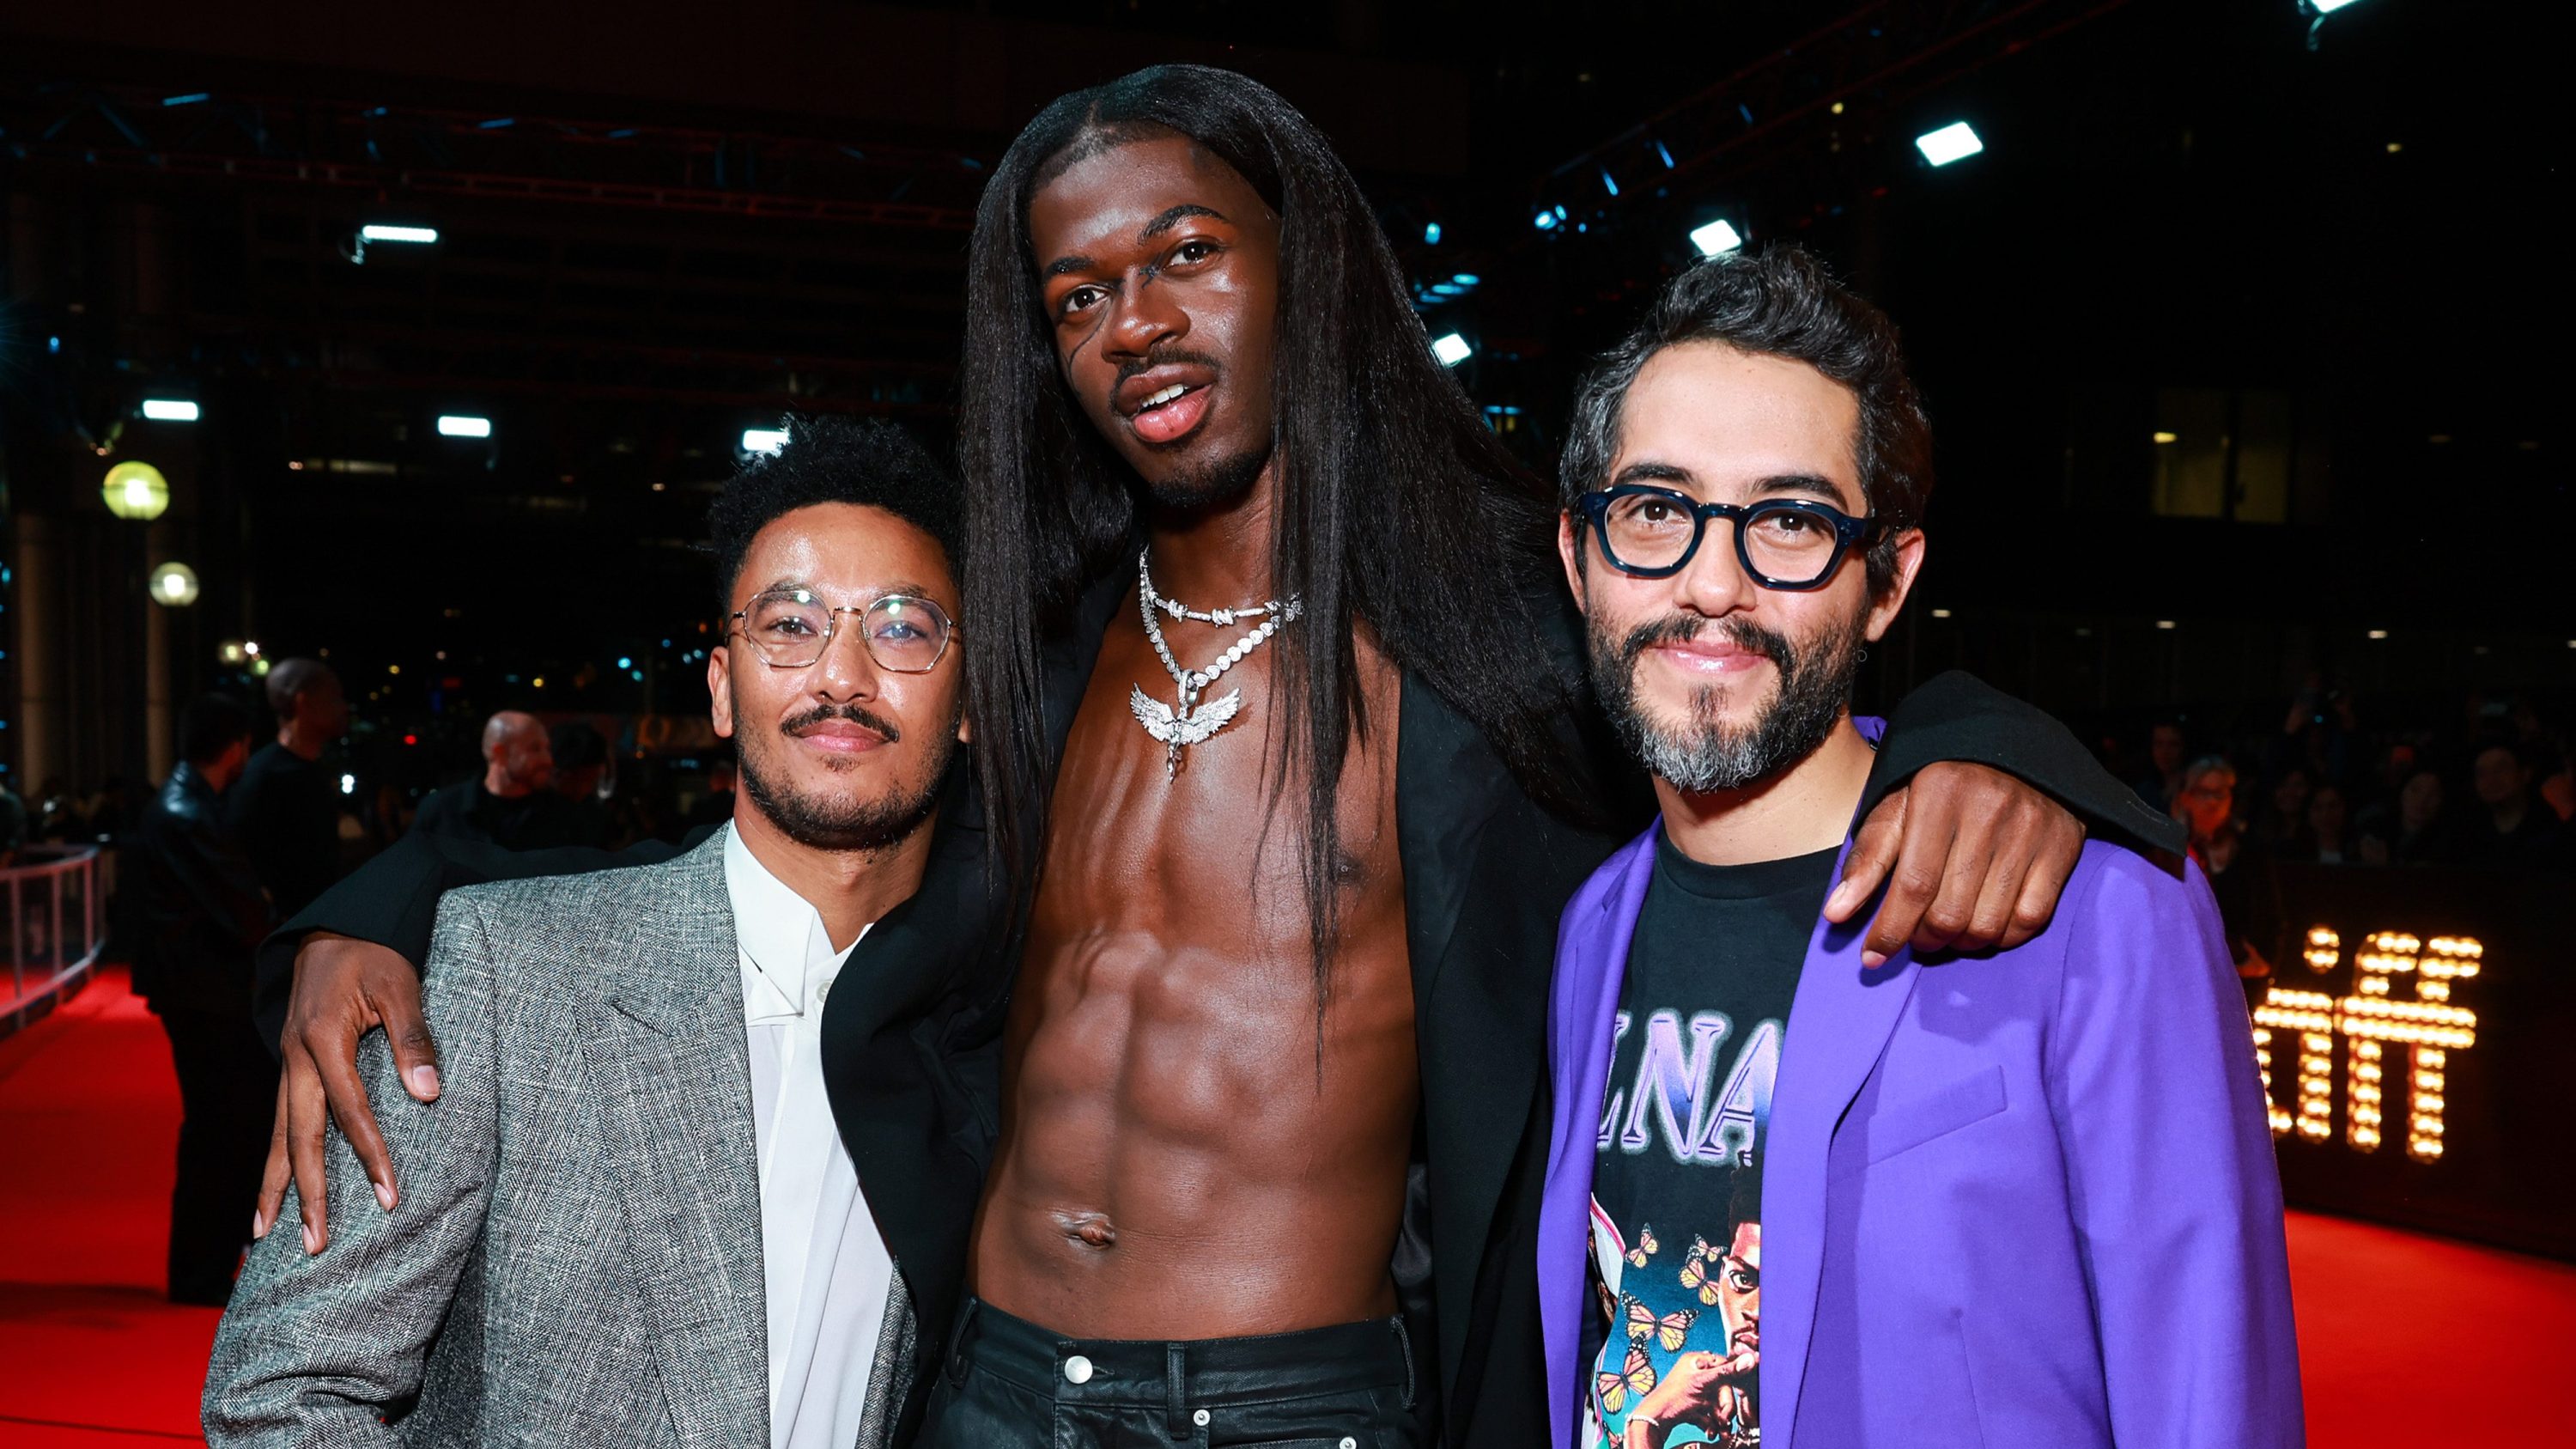 TORONTO, ONTARIO - SEPTEMBER 09: (L-R) Zac Manuel, Lil Nas X, and Carlos Lopez Estrada attend the "Lil Nas X: Long Live Montero" premiere during the 2023 Toronto International Film Festival at Roy Thomson Hall on September 09, 2023 in Toronto, Ontario. (Photo by Matt Winkelmeyer/Getty Images)